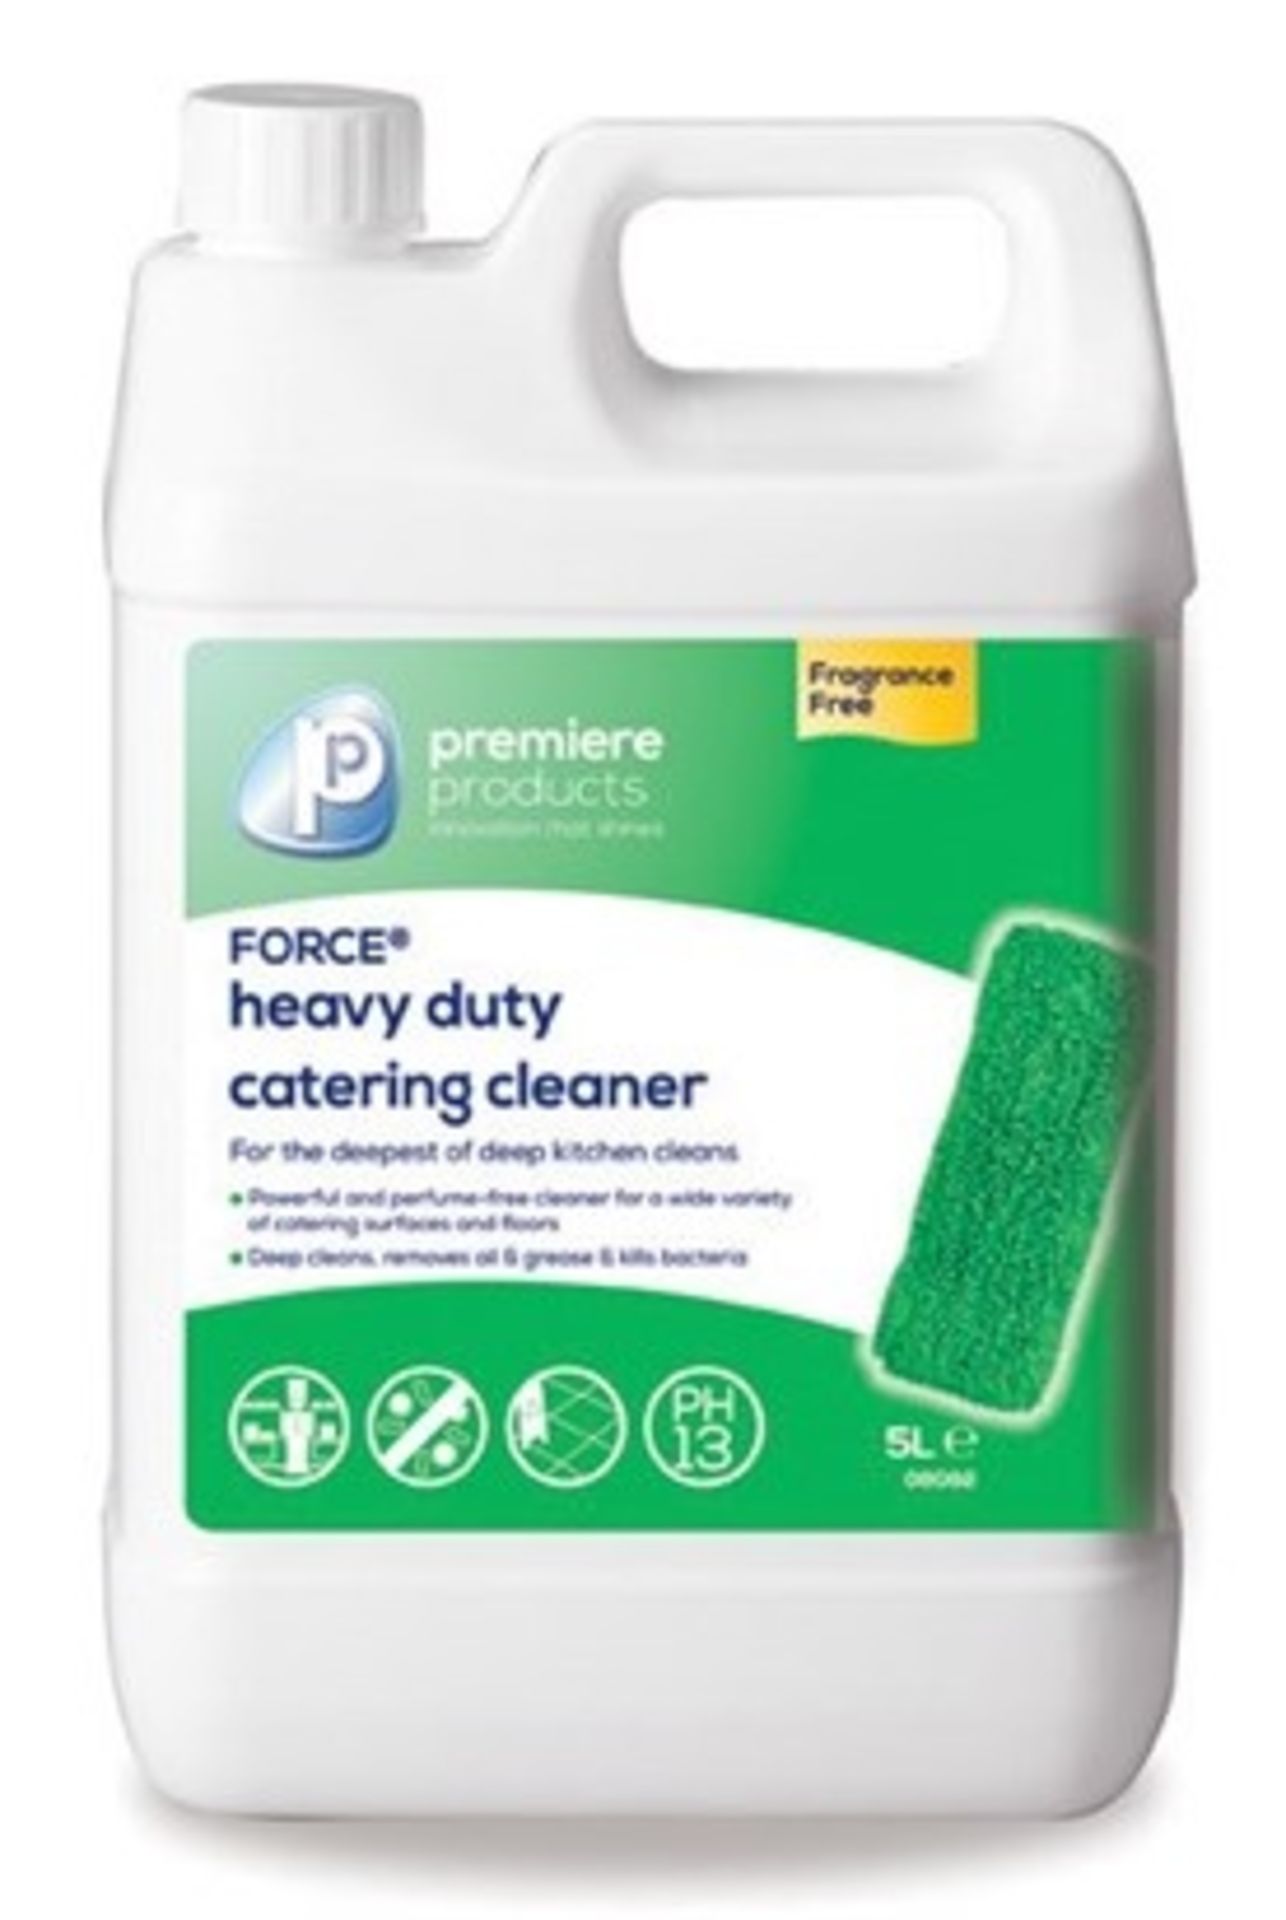 10 x Premiere Force 5 Litre Heavy Duty Degreaser - Premiere Products - Includes 10 x 5 Litre Contain